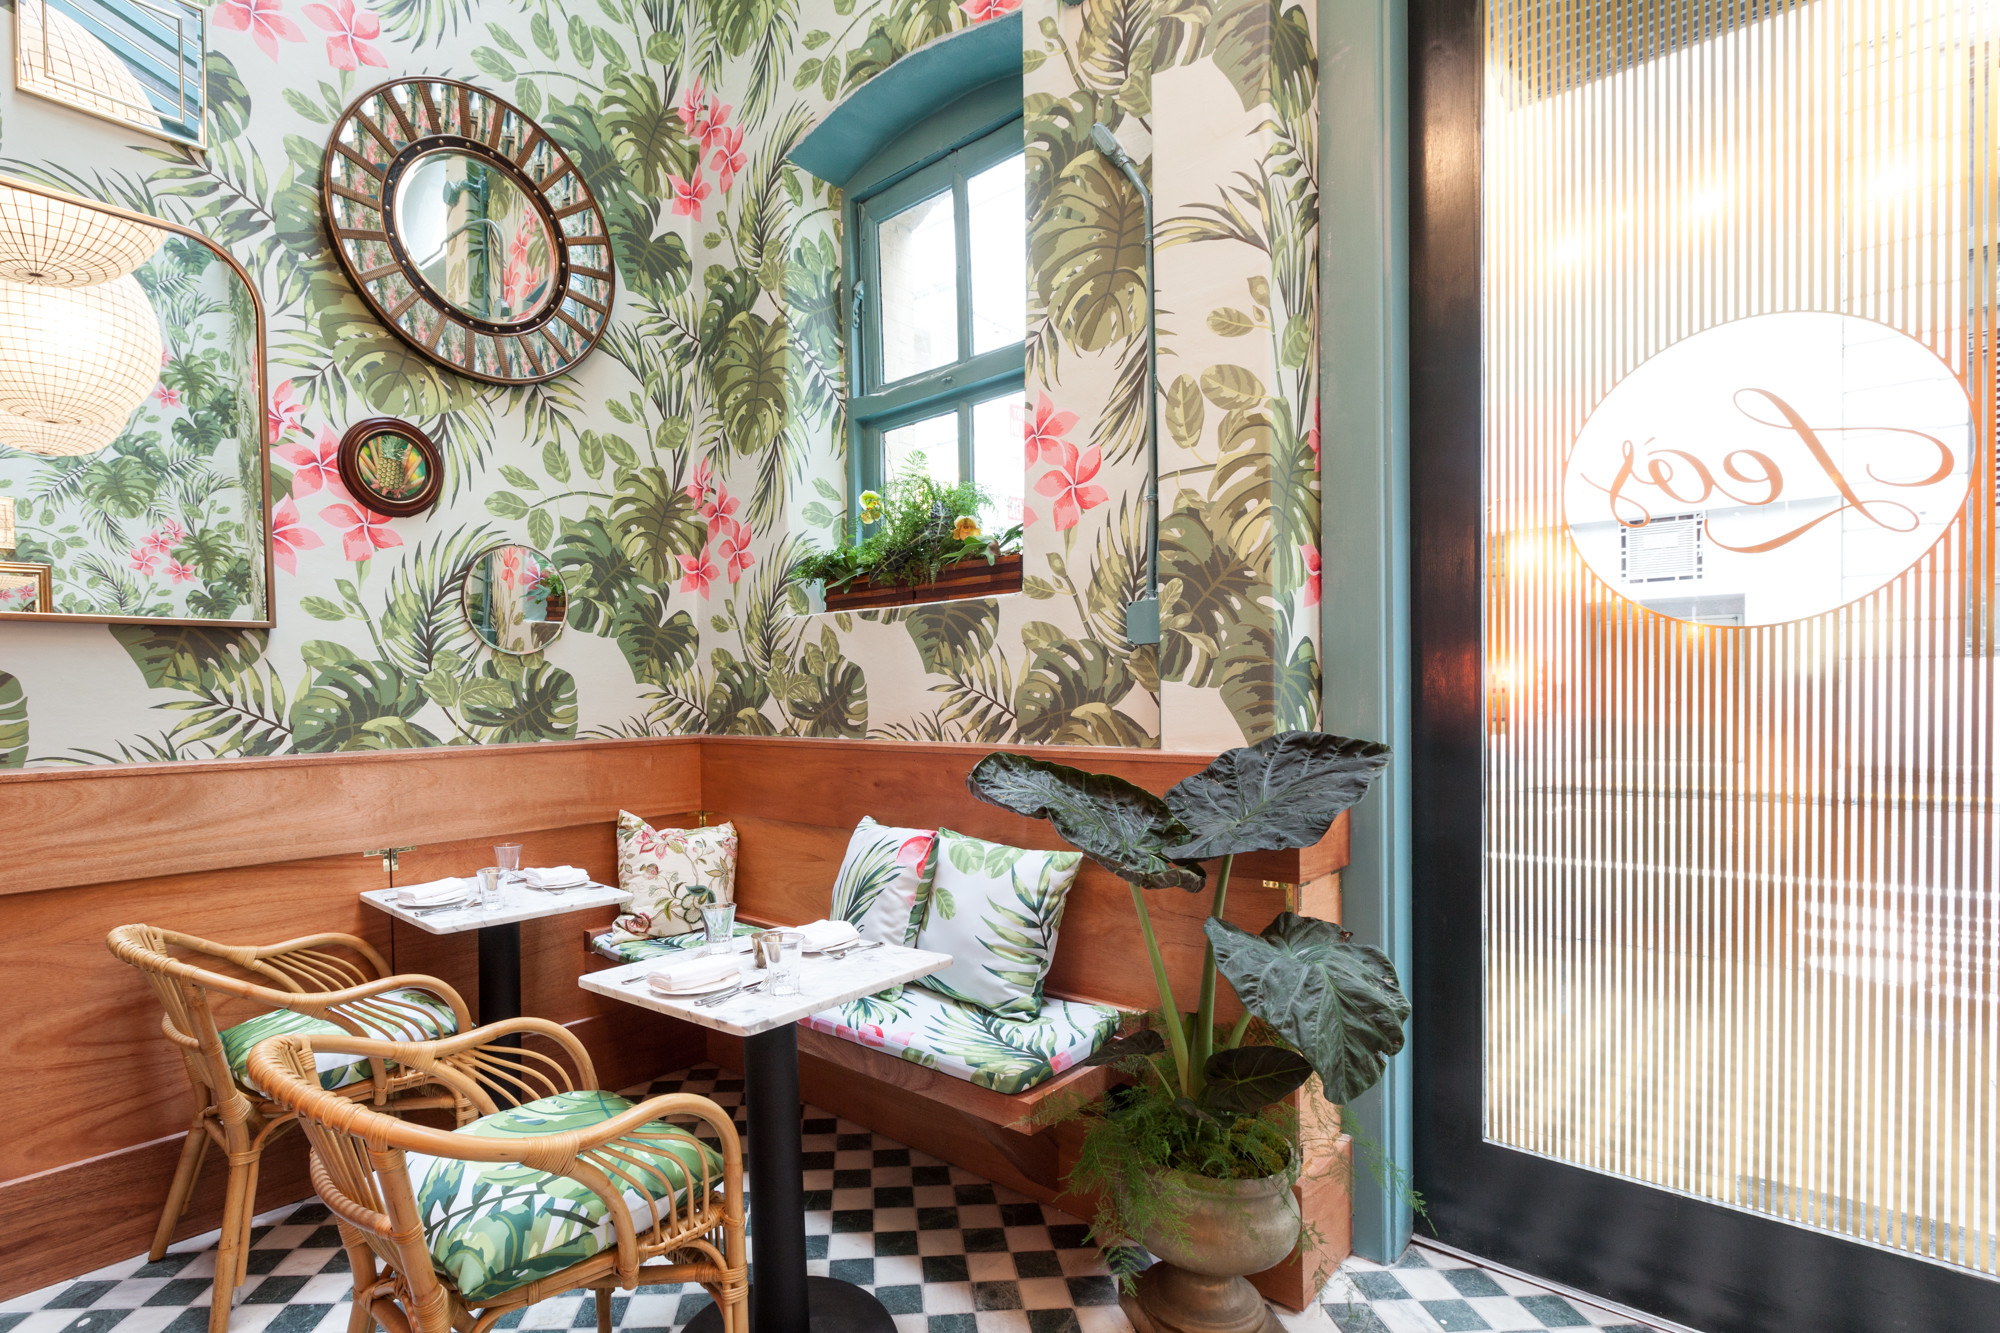 2000x1333 Botanical Wallpaper Is Taking Over Restaurant Dining Rooms